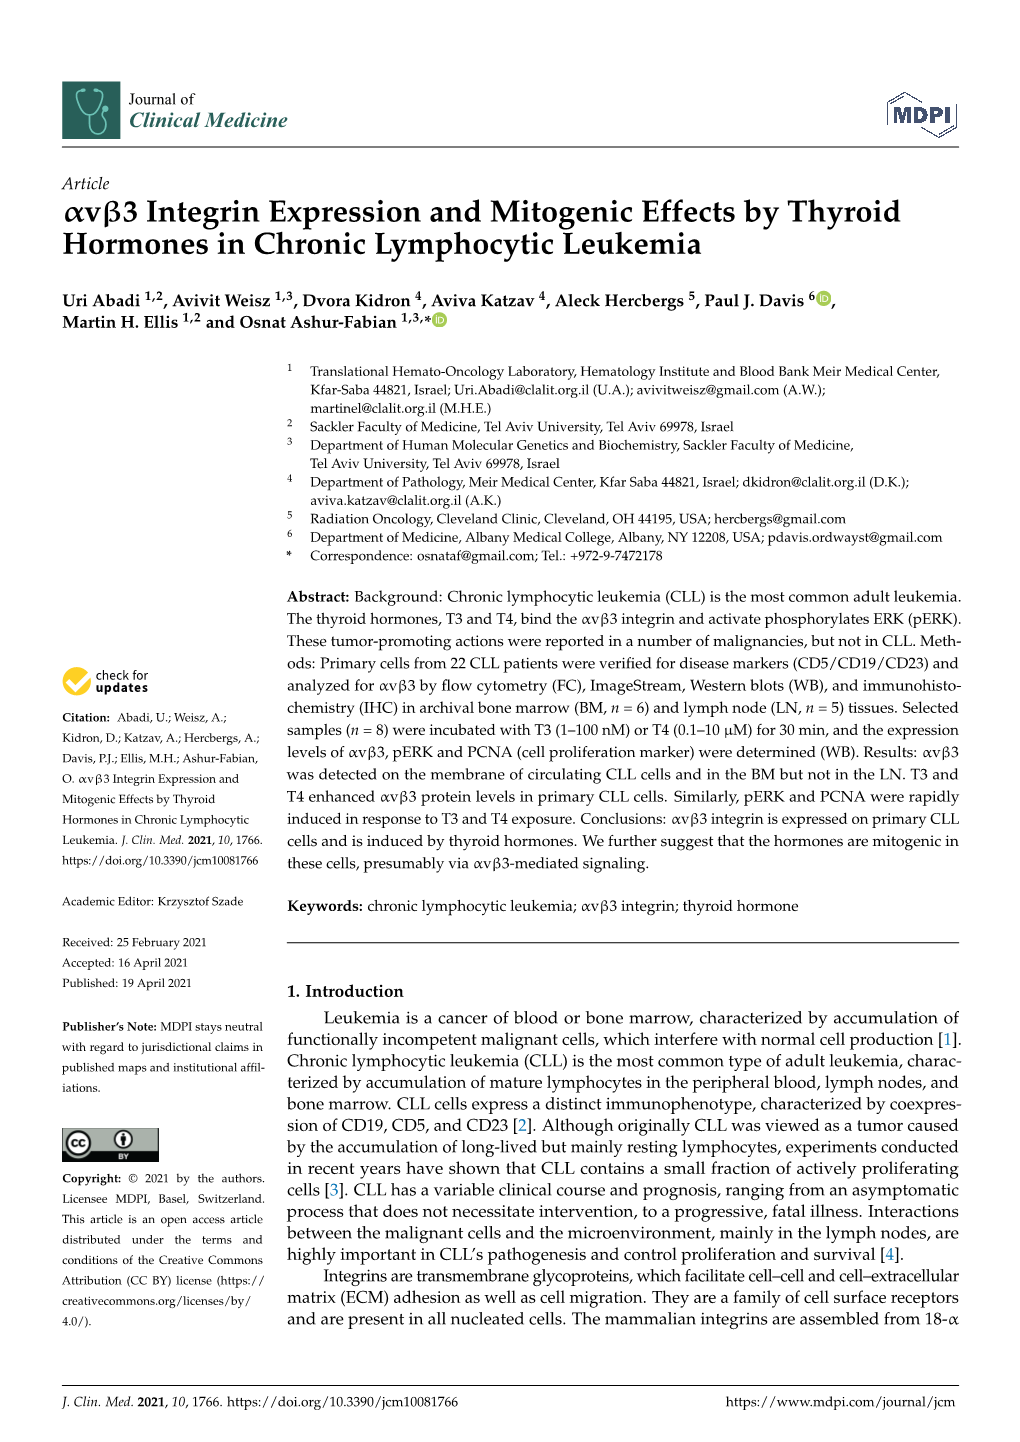 V3 Integrin Expression and Mitogenic Effects by Thyroid Hormones in Chronic Lymphocytic Leukemia